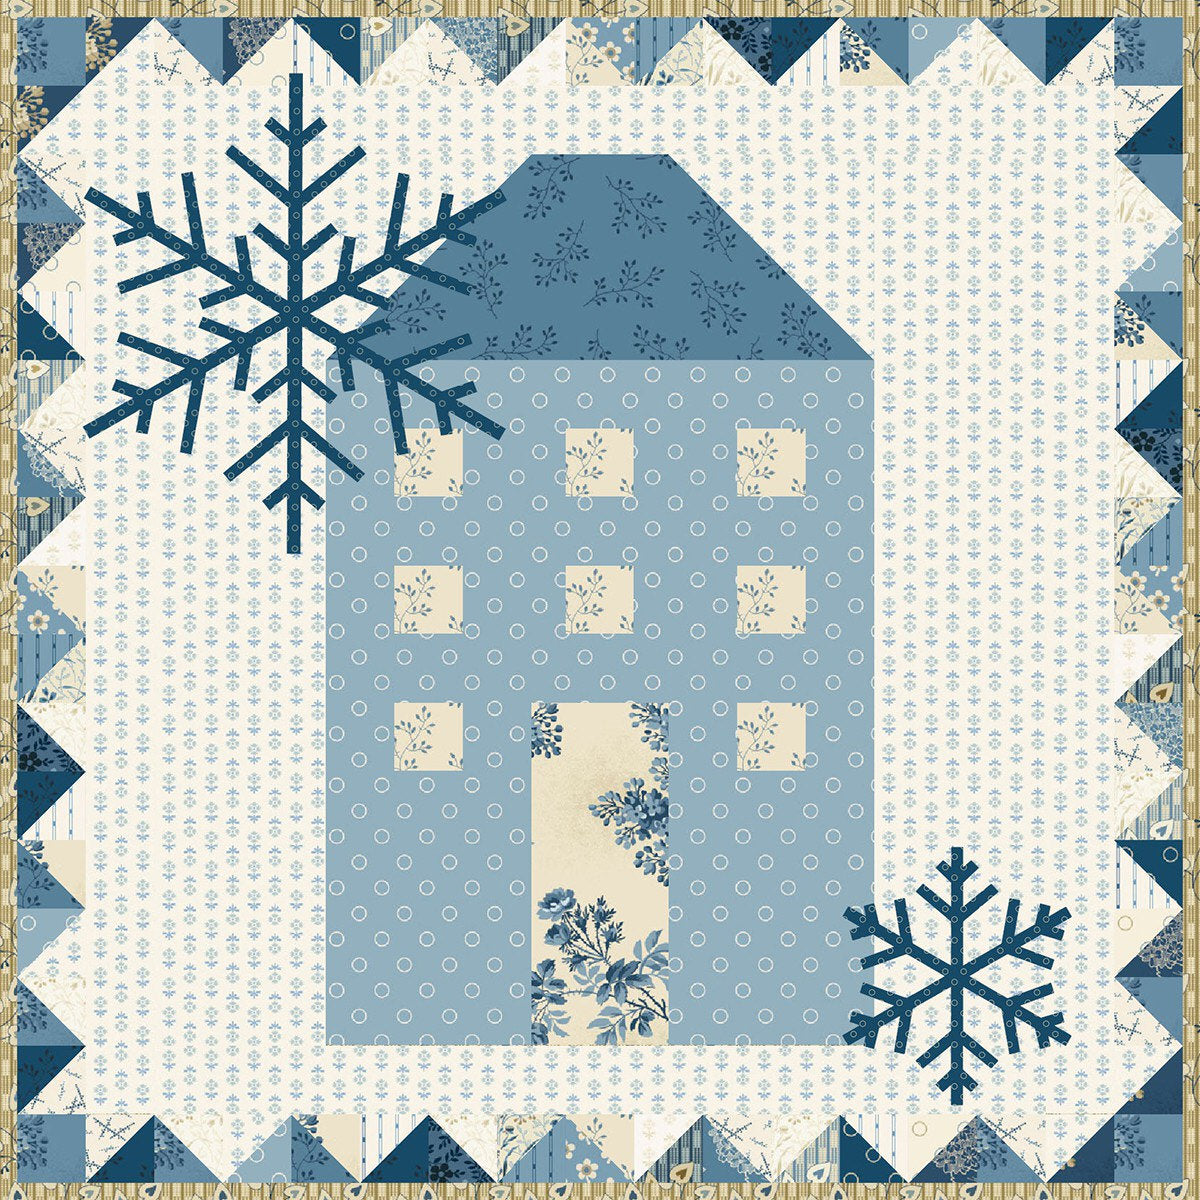 Home for the Holidays Quilted Pillow Pattern - Laundry Basket Quilts - Edyta Sitar - Optional Fusible Appliqués